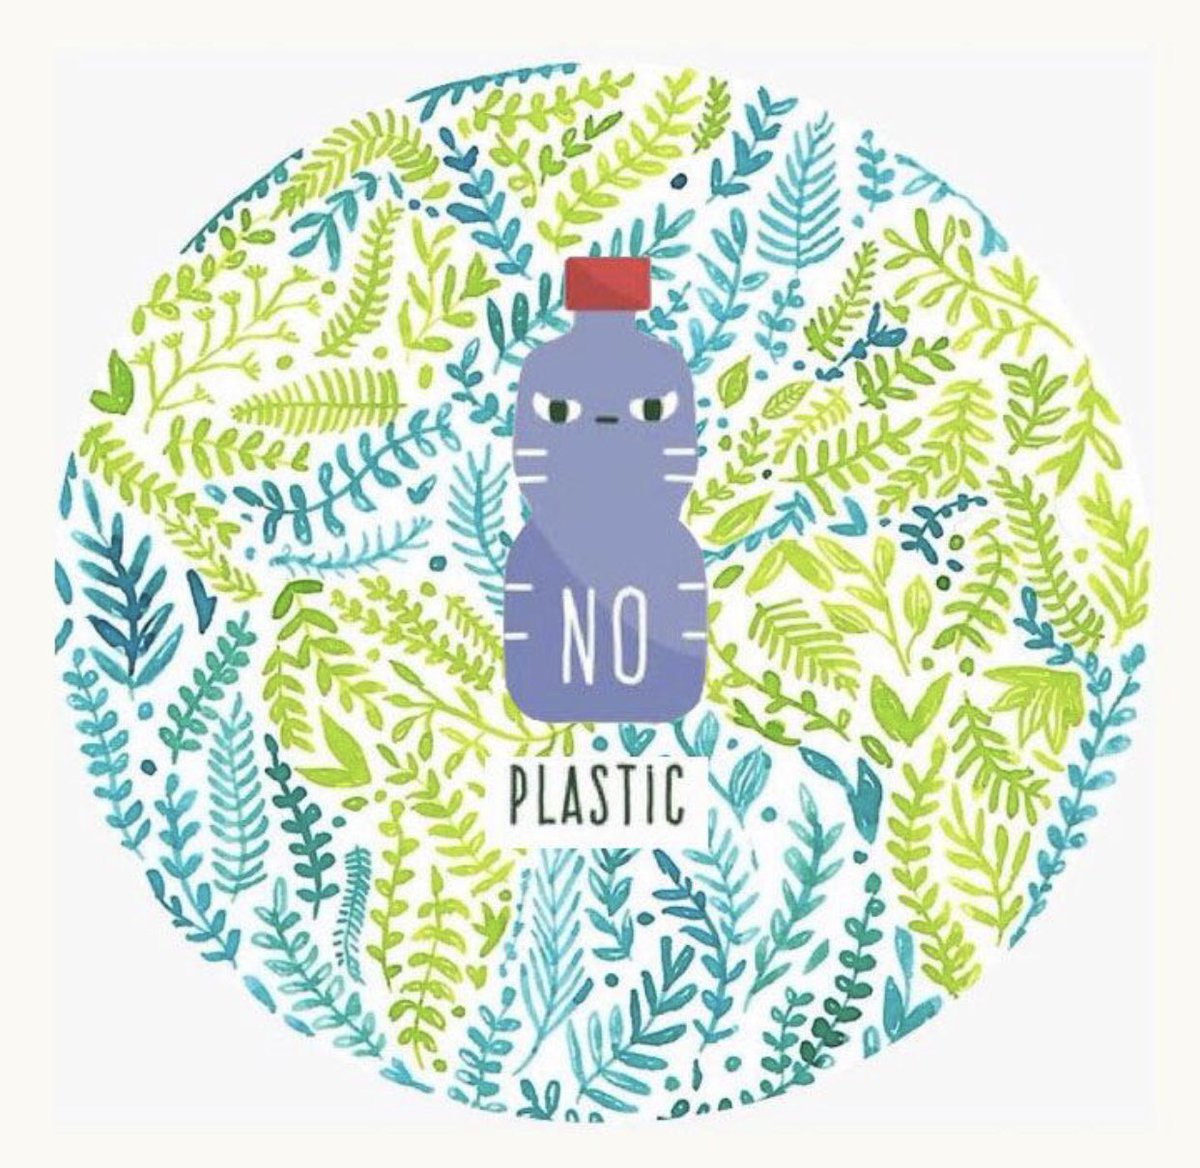 Yes together we can bring it all to an end. #absaafhogapakistan #pollutionsolution #recycle #saynotoplastic #plasticfree #mothernature #zerowastepakistan #igdaily